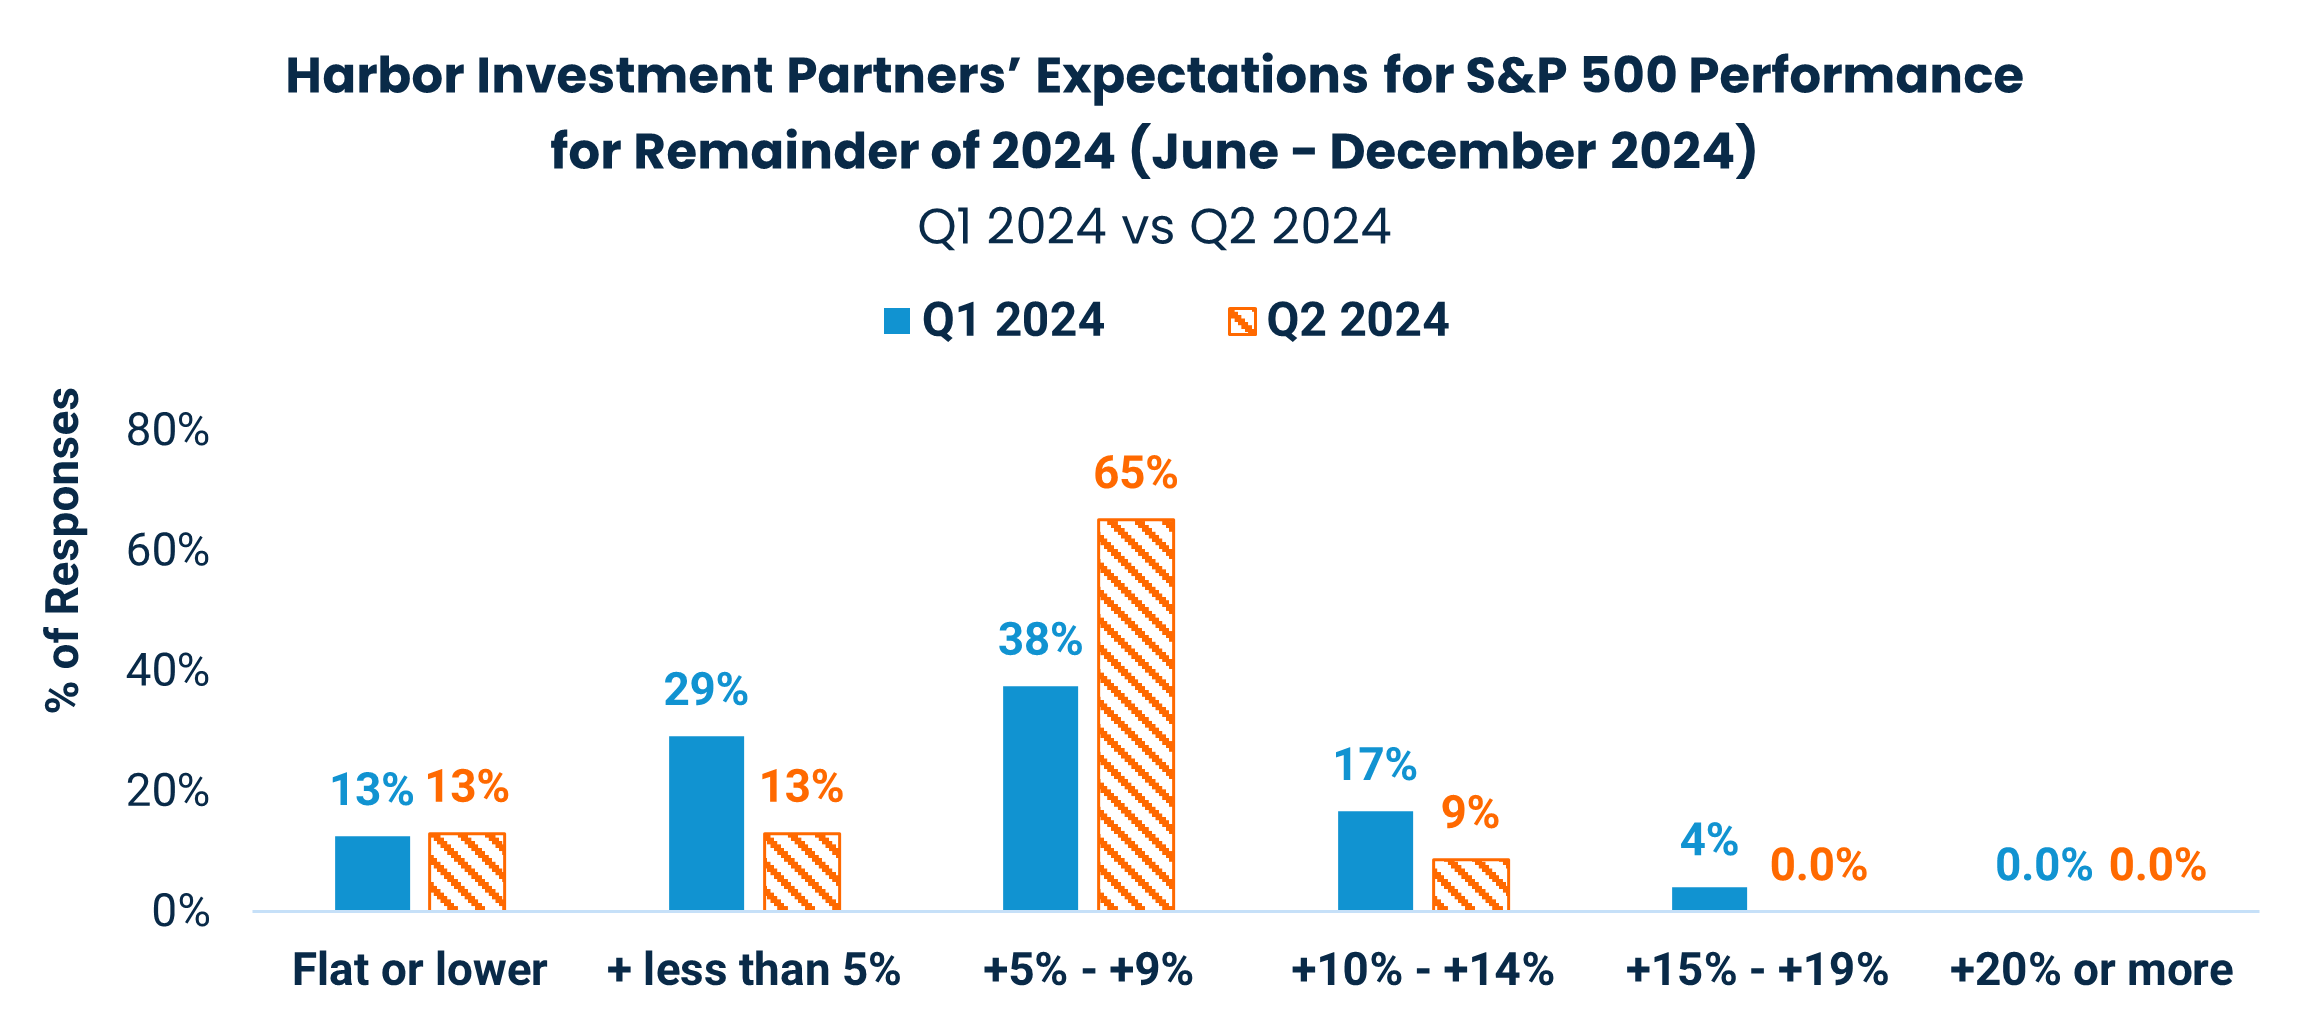 Harbor Investment Partners’ Expectations for S&P 500 Performance for Remainder of 2024 (June - December 2024)
Q1 2024 vs Q2 2024